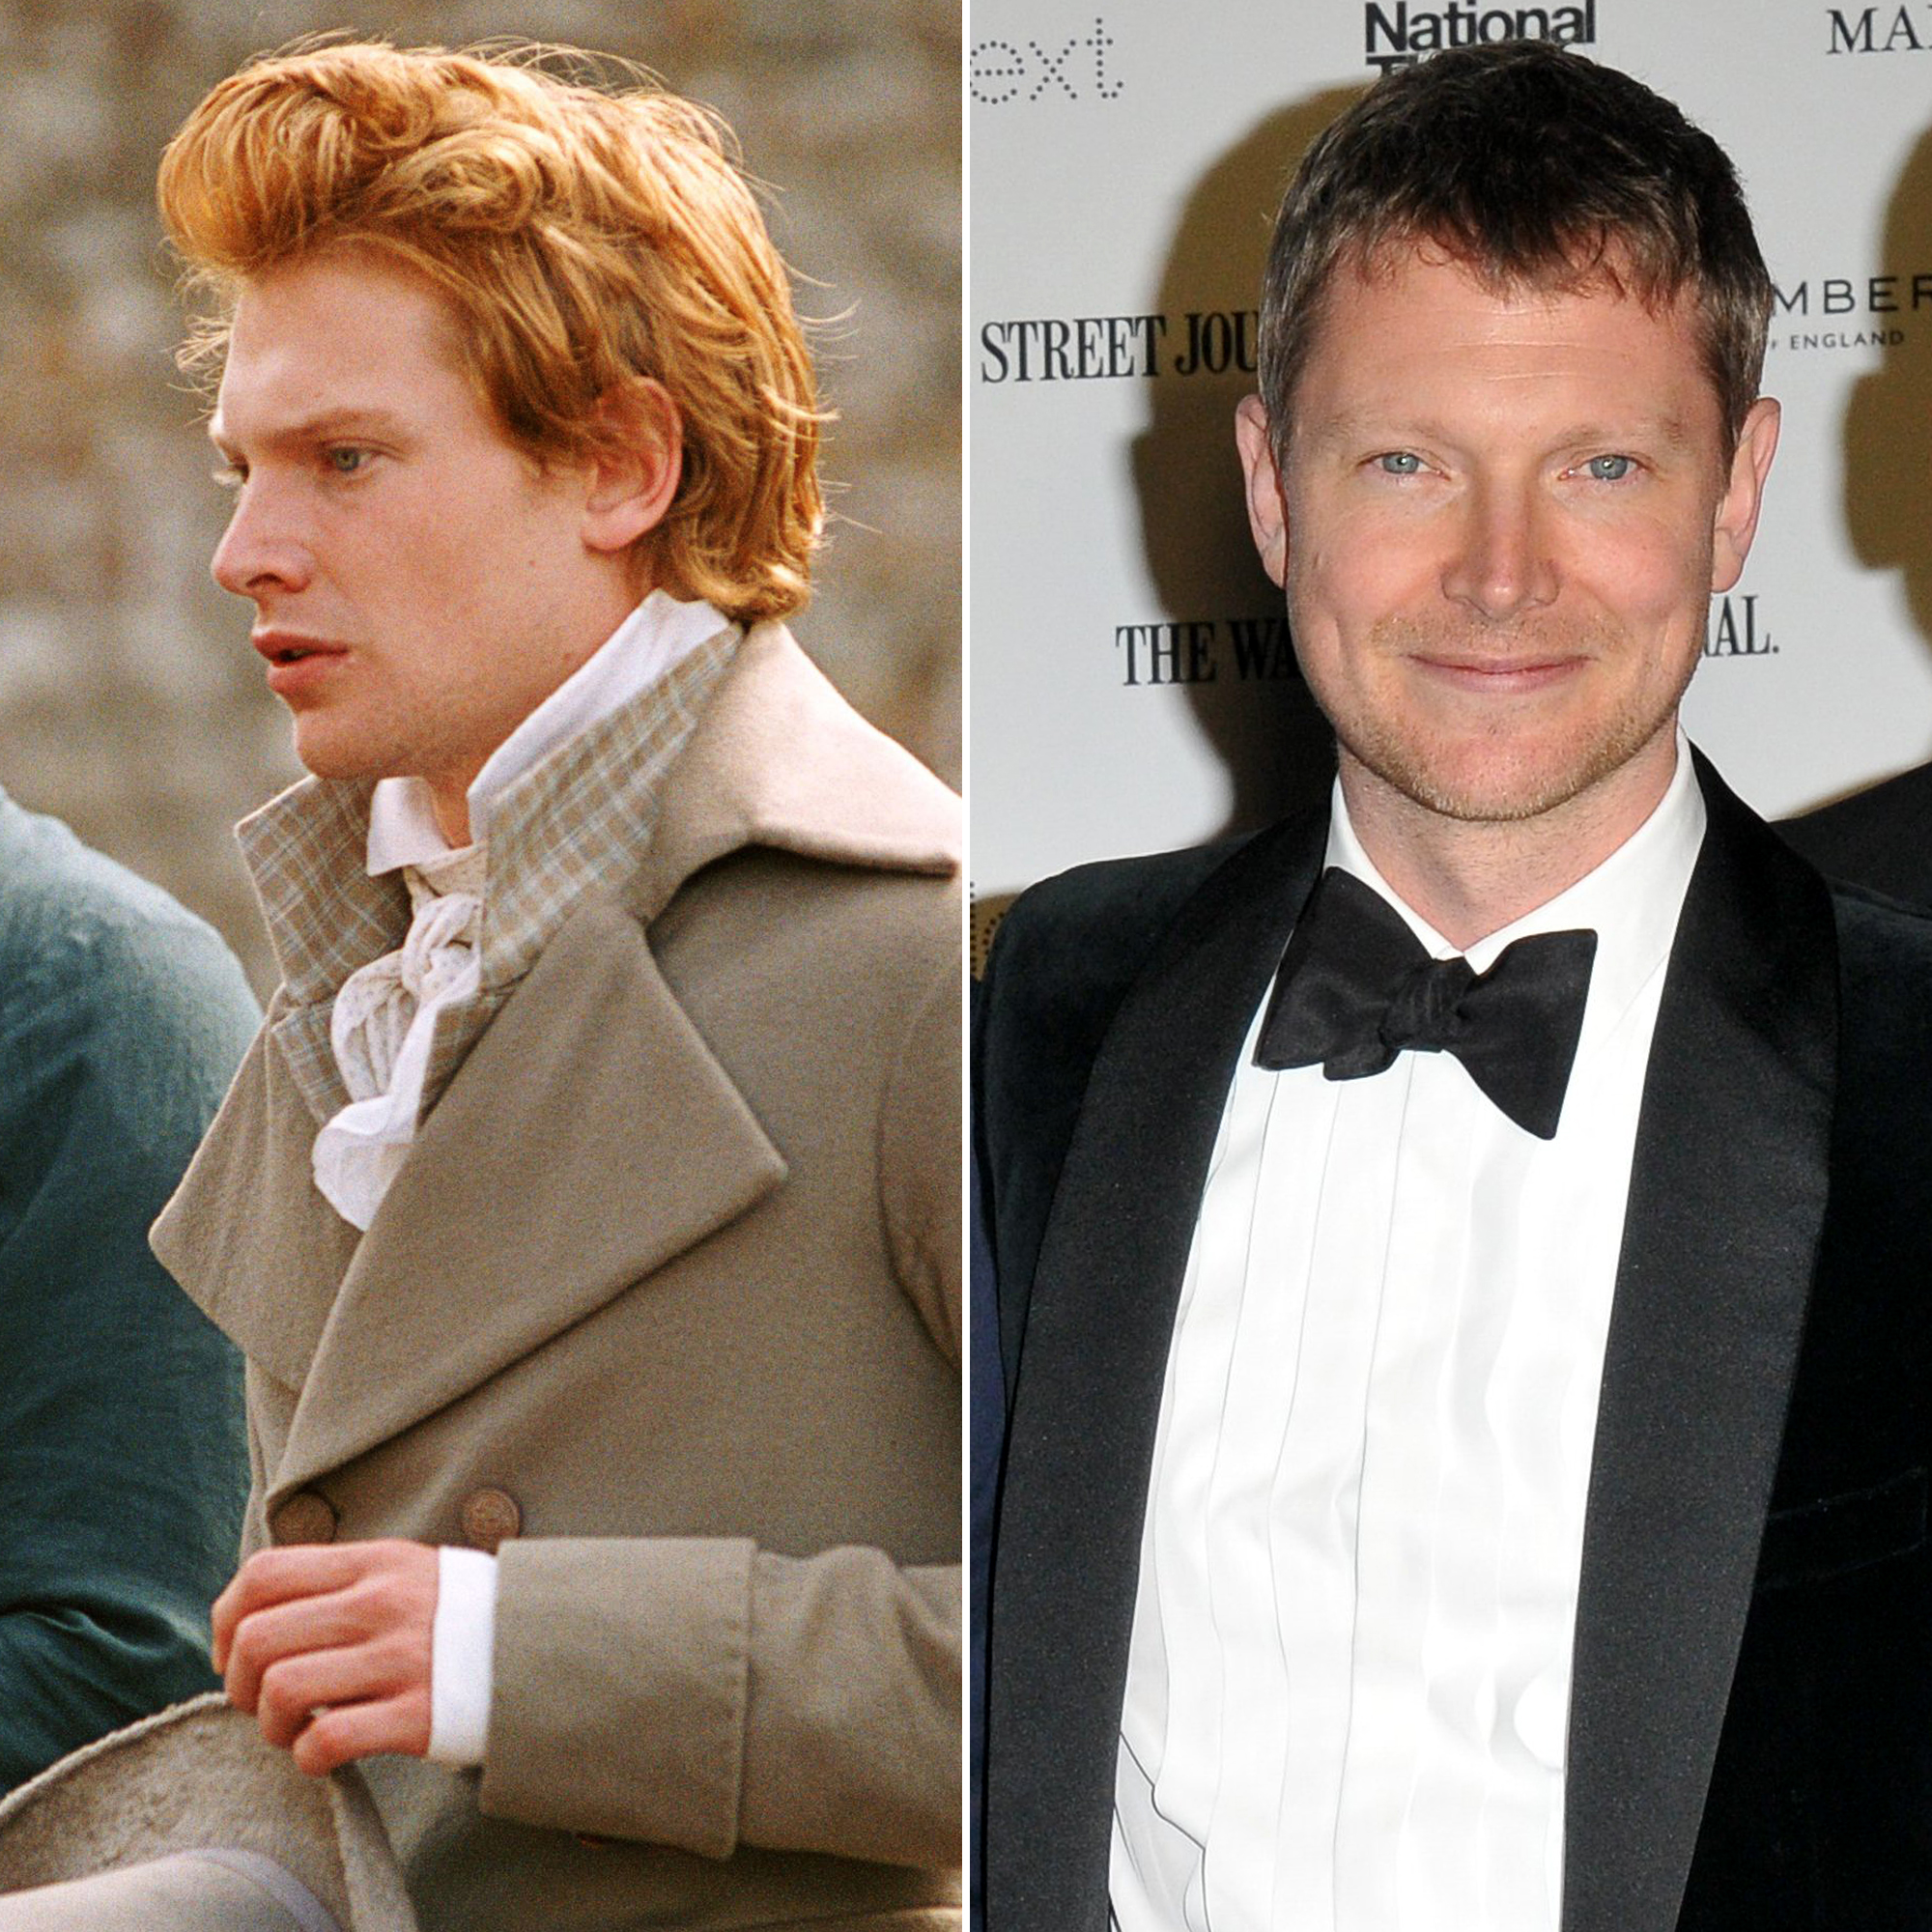 Pride & Prejudice' cast: Where are they now?, Gallery